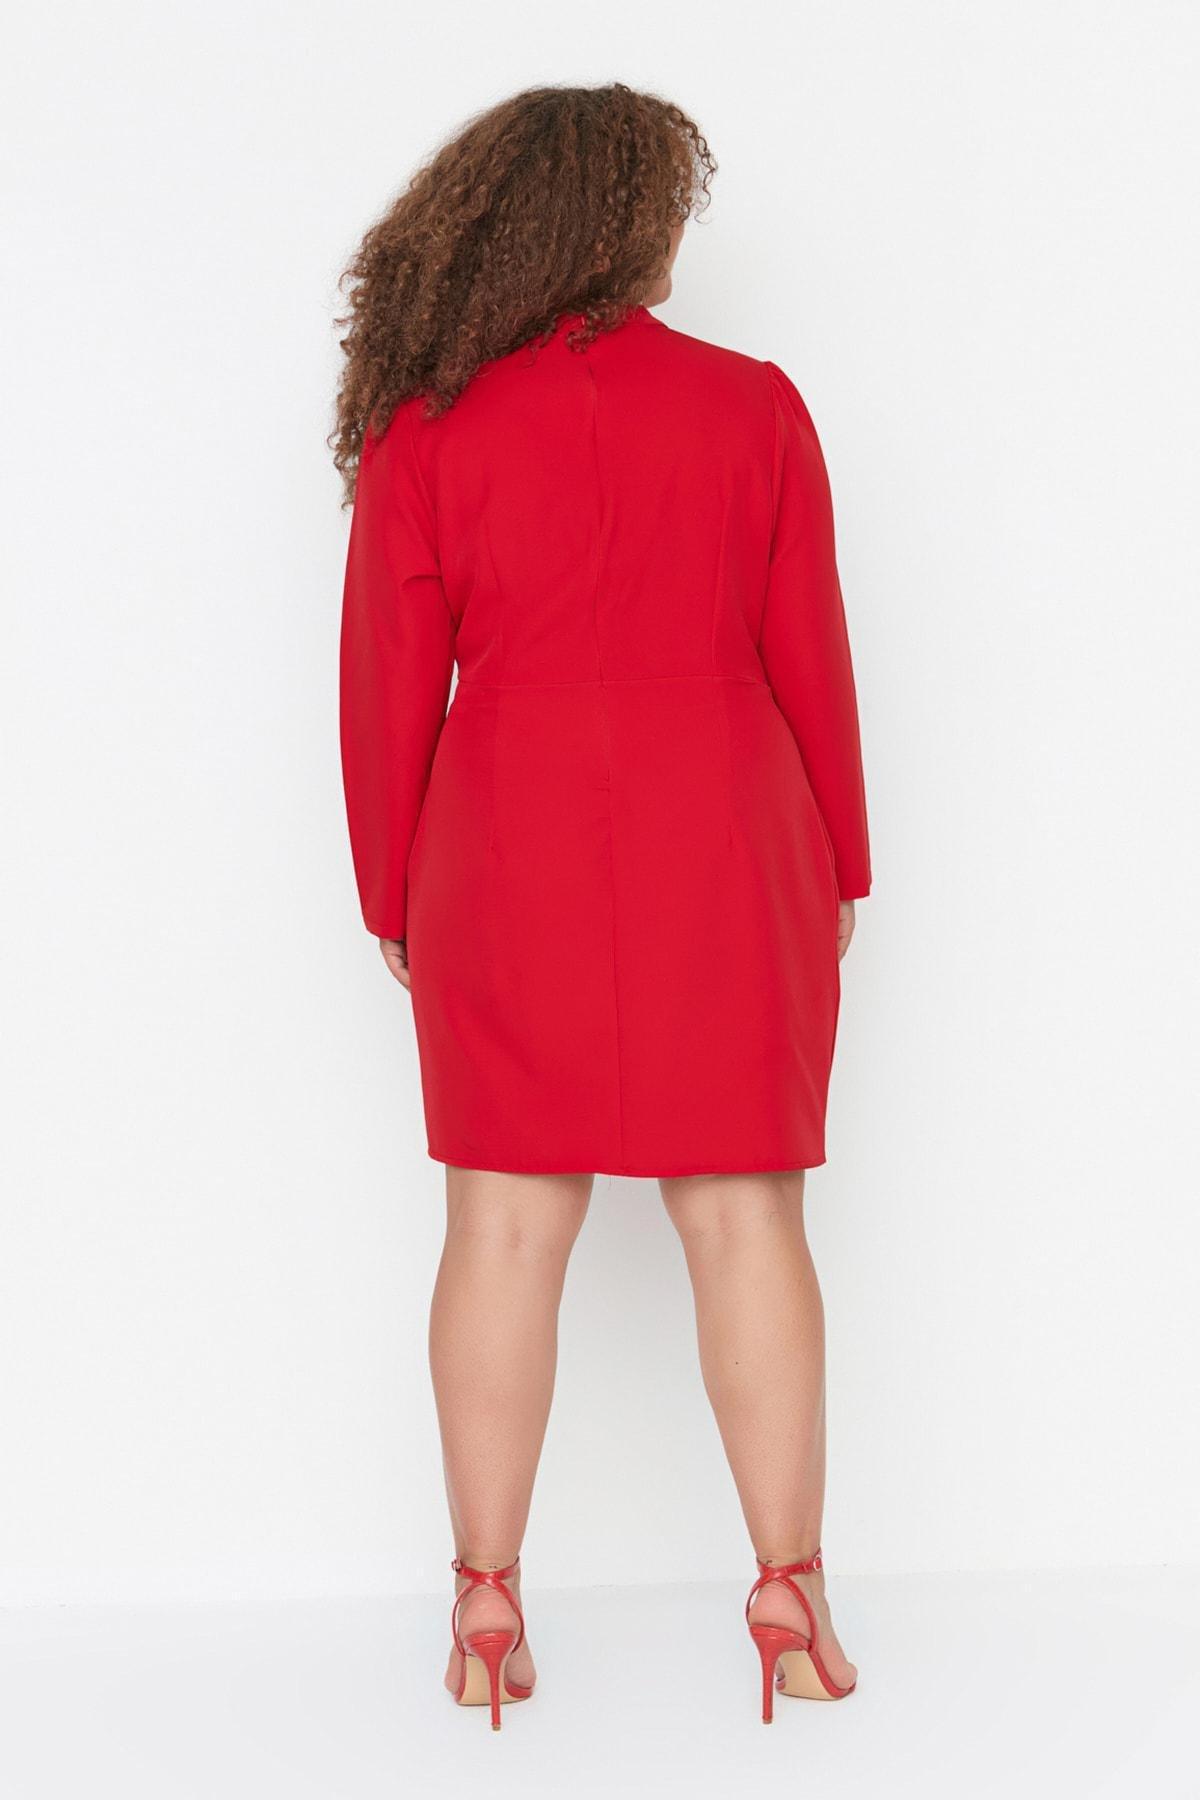 Trendyol - Red Cut-Out Detailed Plus Size Dress